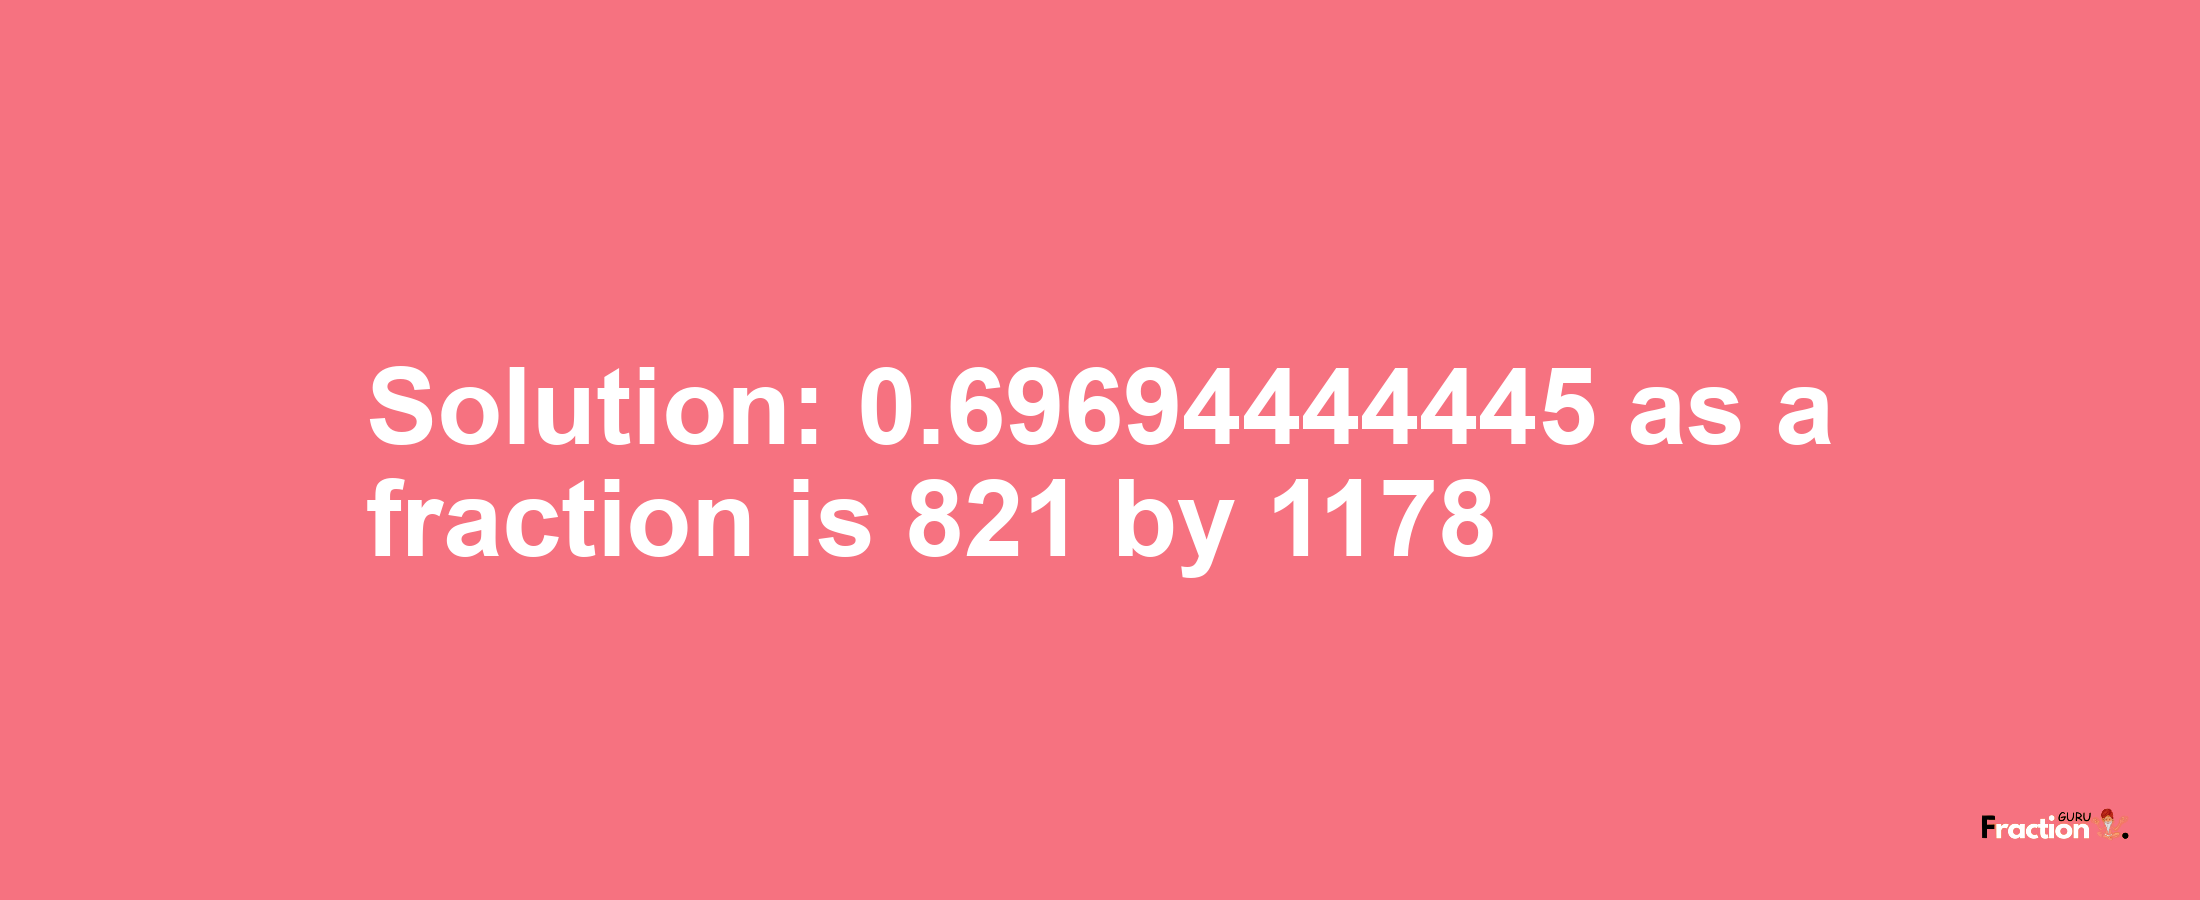 Solution:0.69694444445 as a fraction is 821/1178